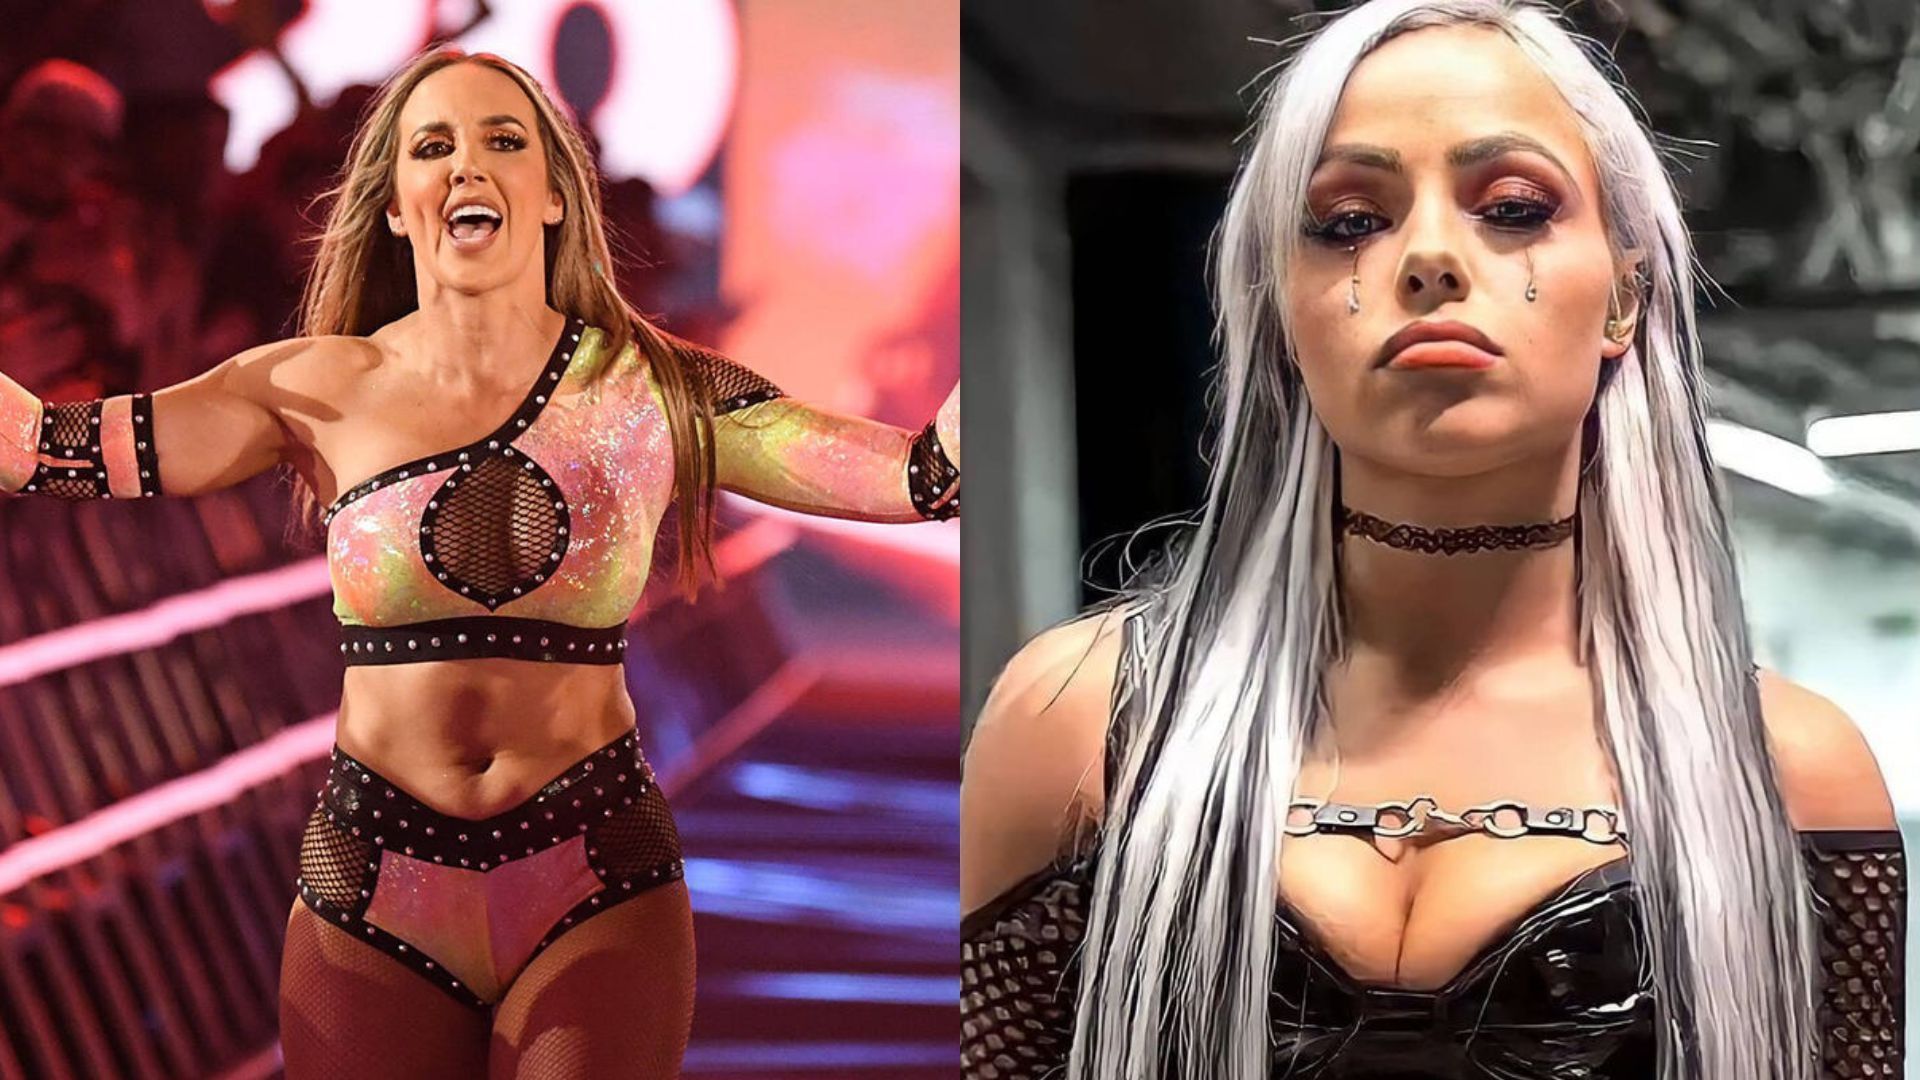 Chelsea Green sent a message to Liv Morgan on her birthday